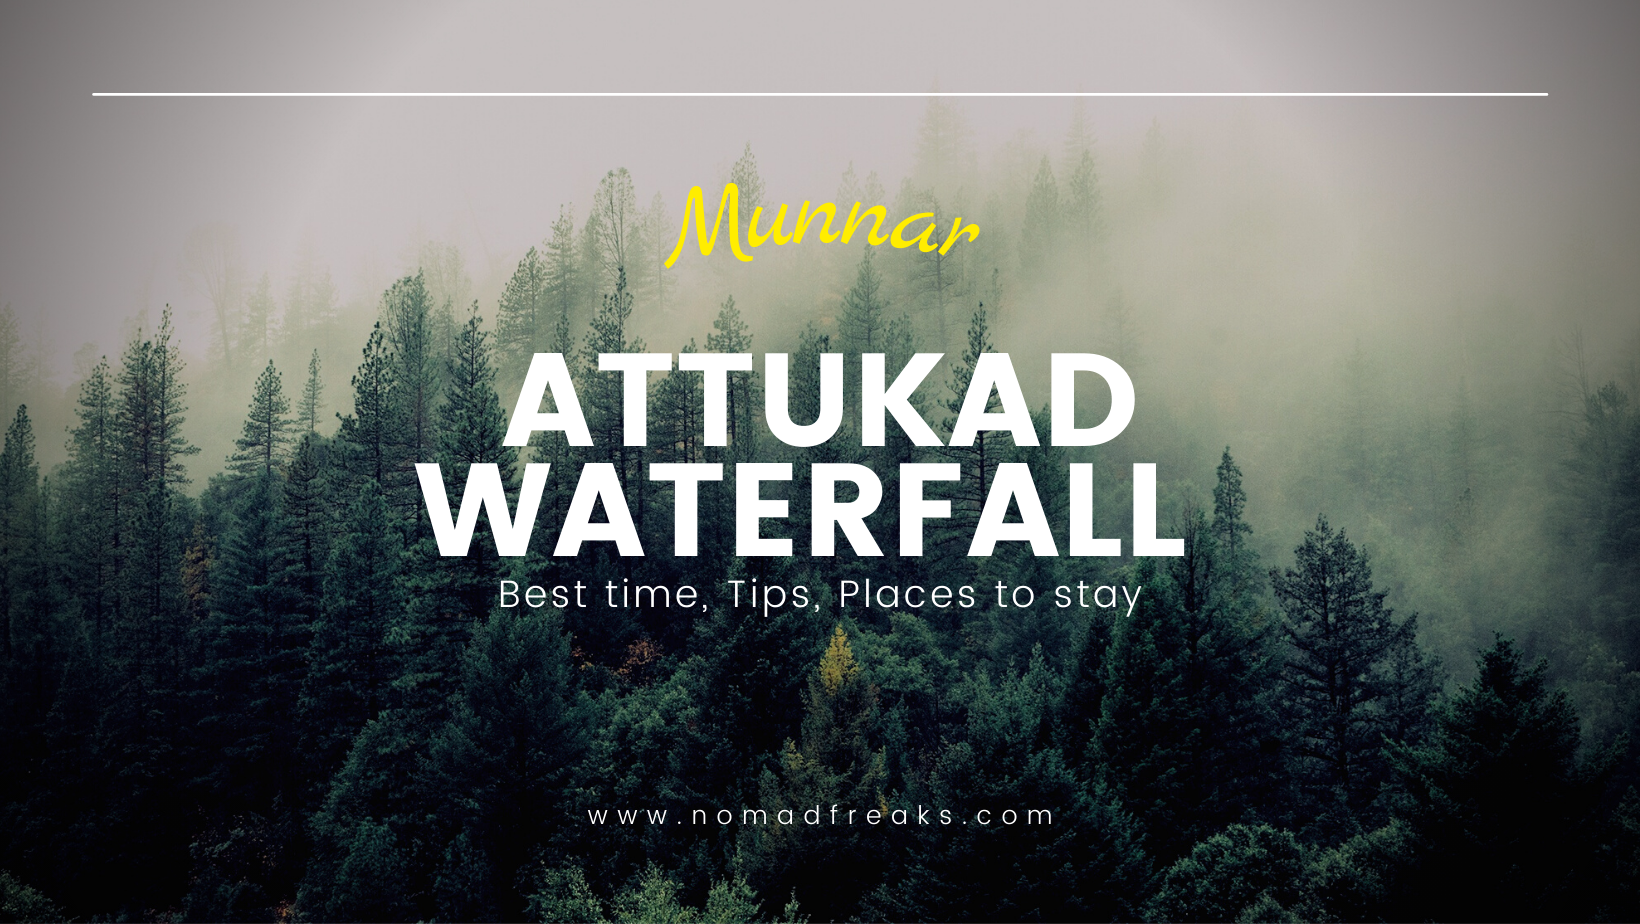 Attukad Waterfall Munnar - Best time, Tips, Places to stay